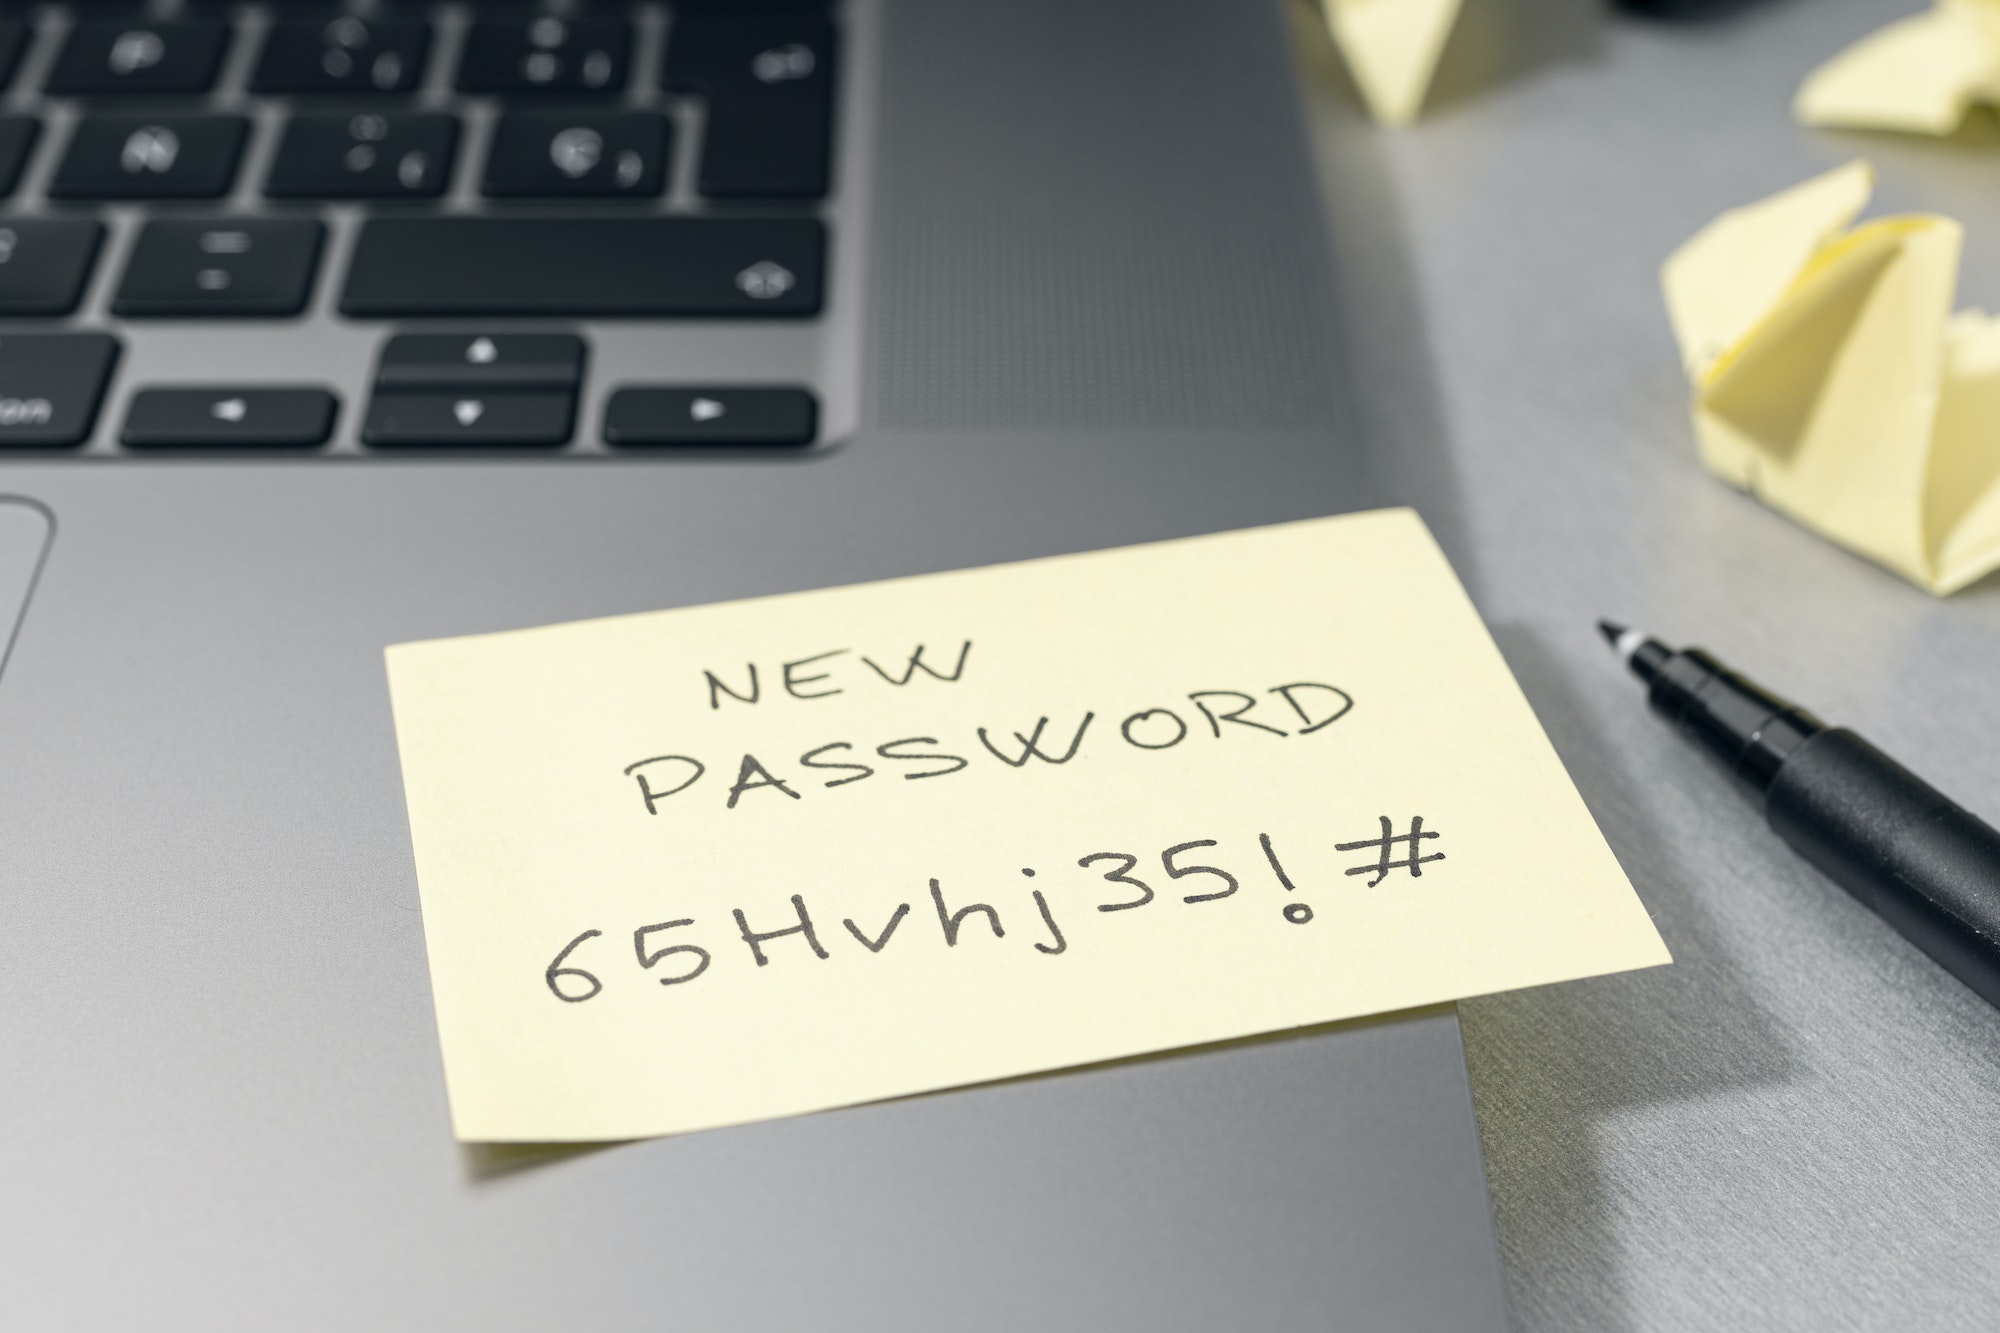 Strong password on sticky note on laptop